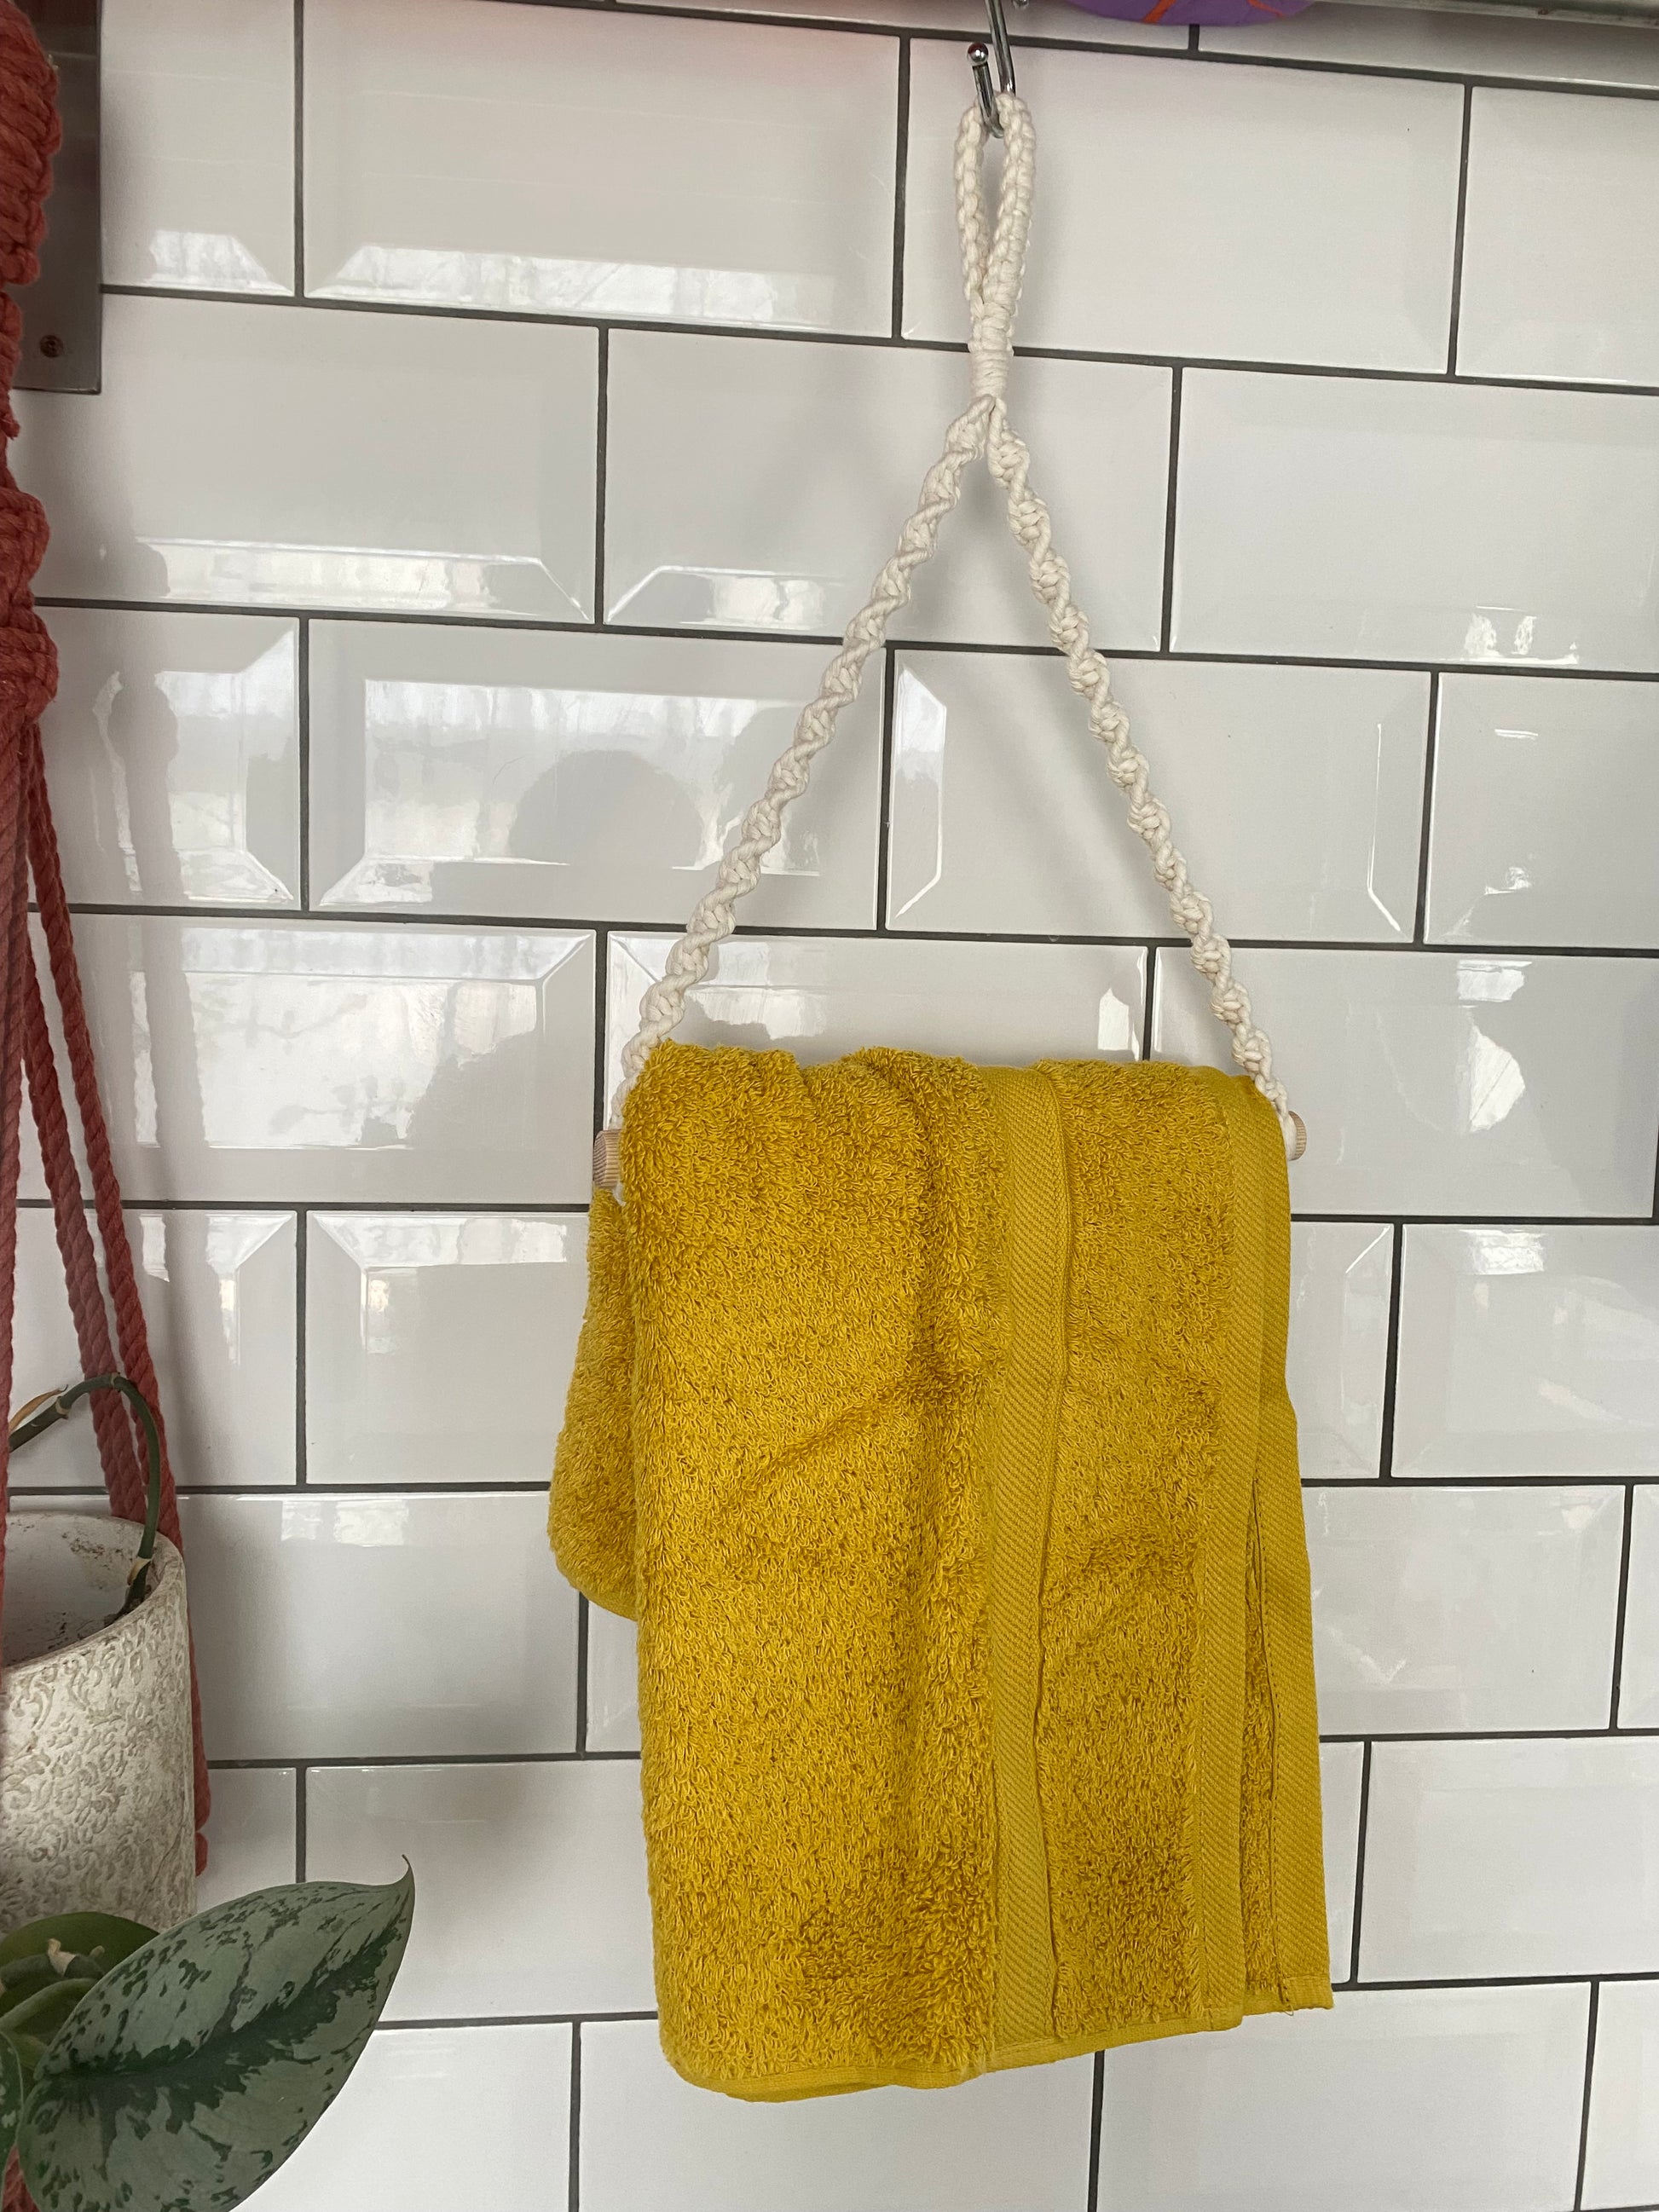 A yellow towel hangs on a braided white rope loop attached to a metal hook against a white tiled wall with a subway pattern. The Hand towel holder by Macra-Made-With-Love adds an eco-friendly touch, complementing the red cord and the potted plant with green leaves visible around the edges of the image.